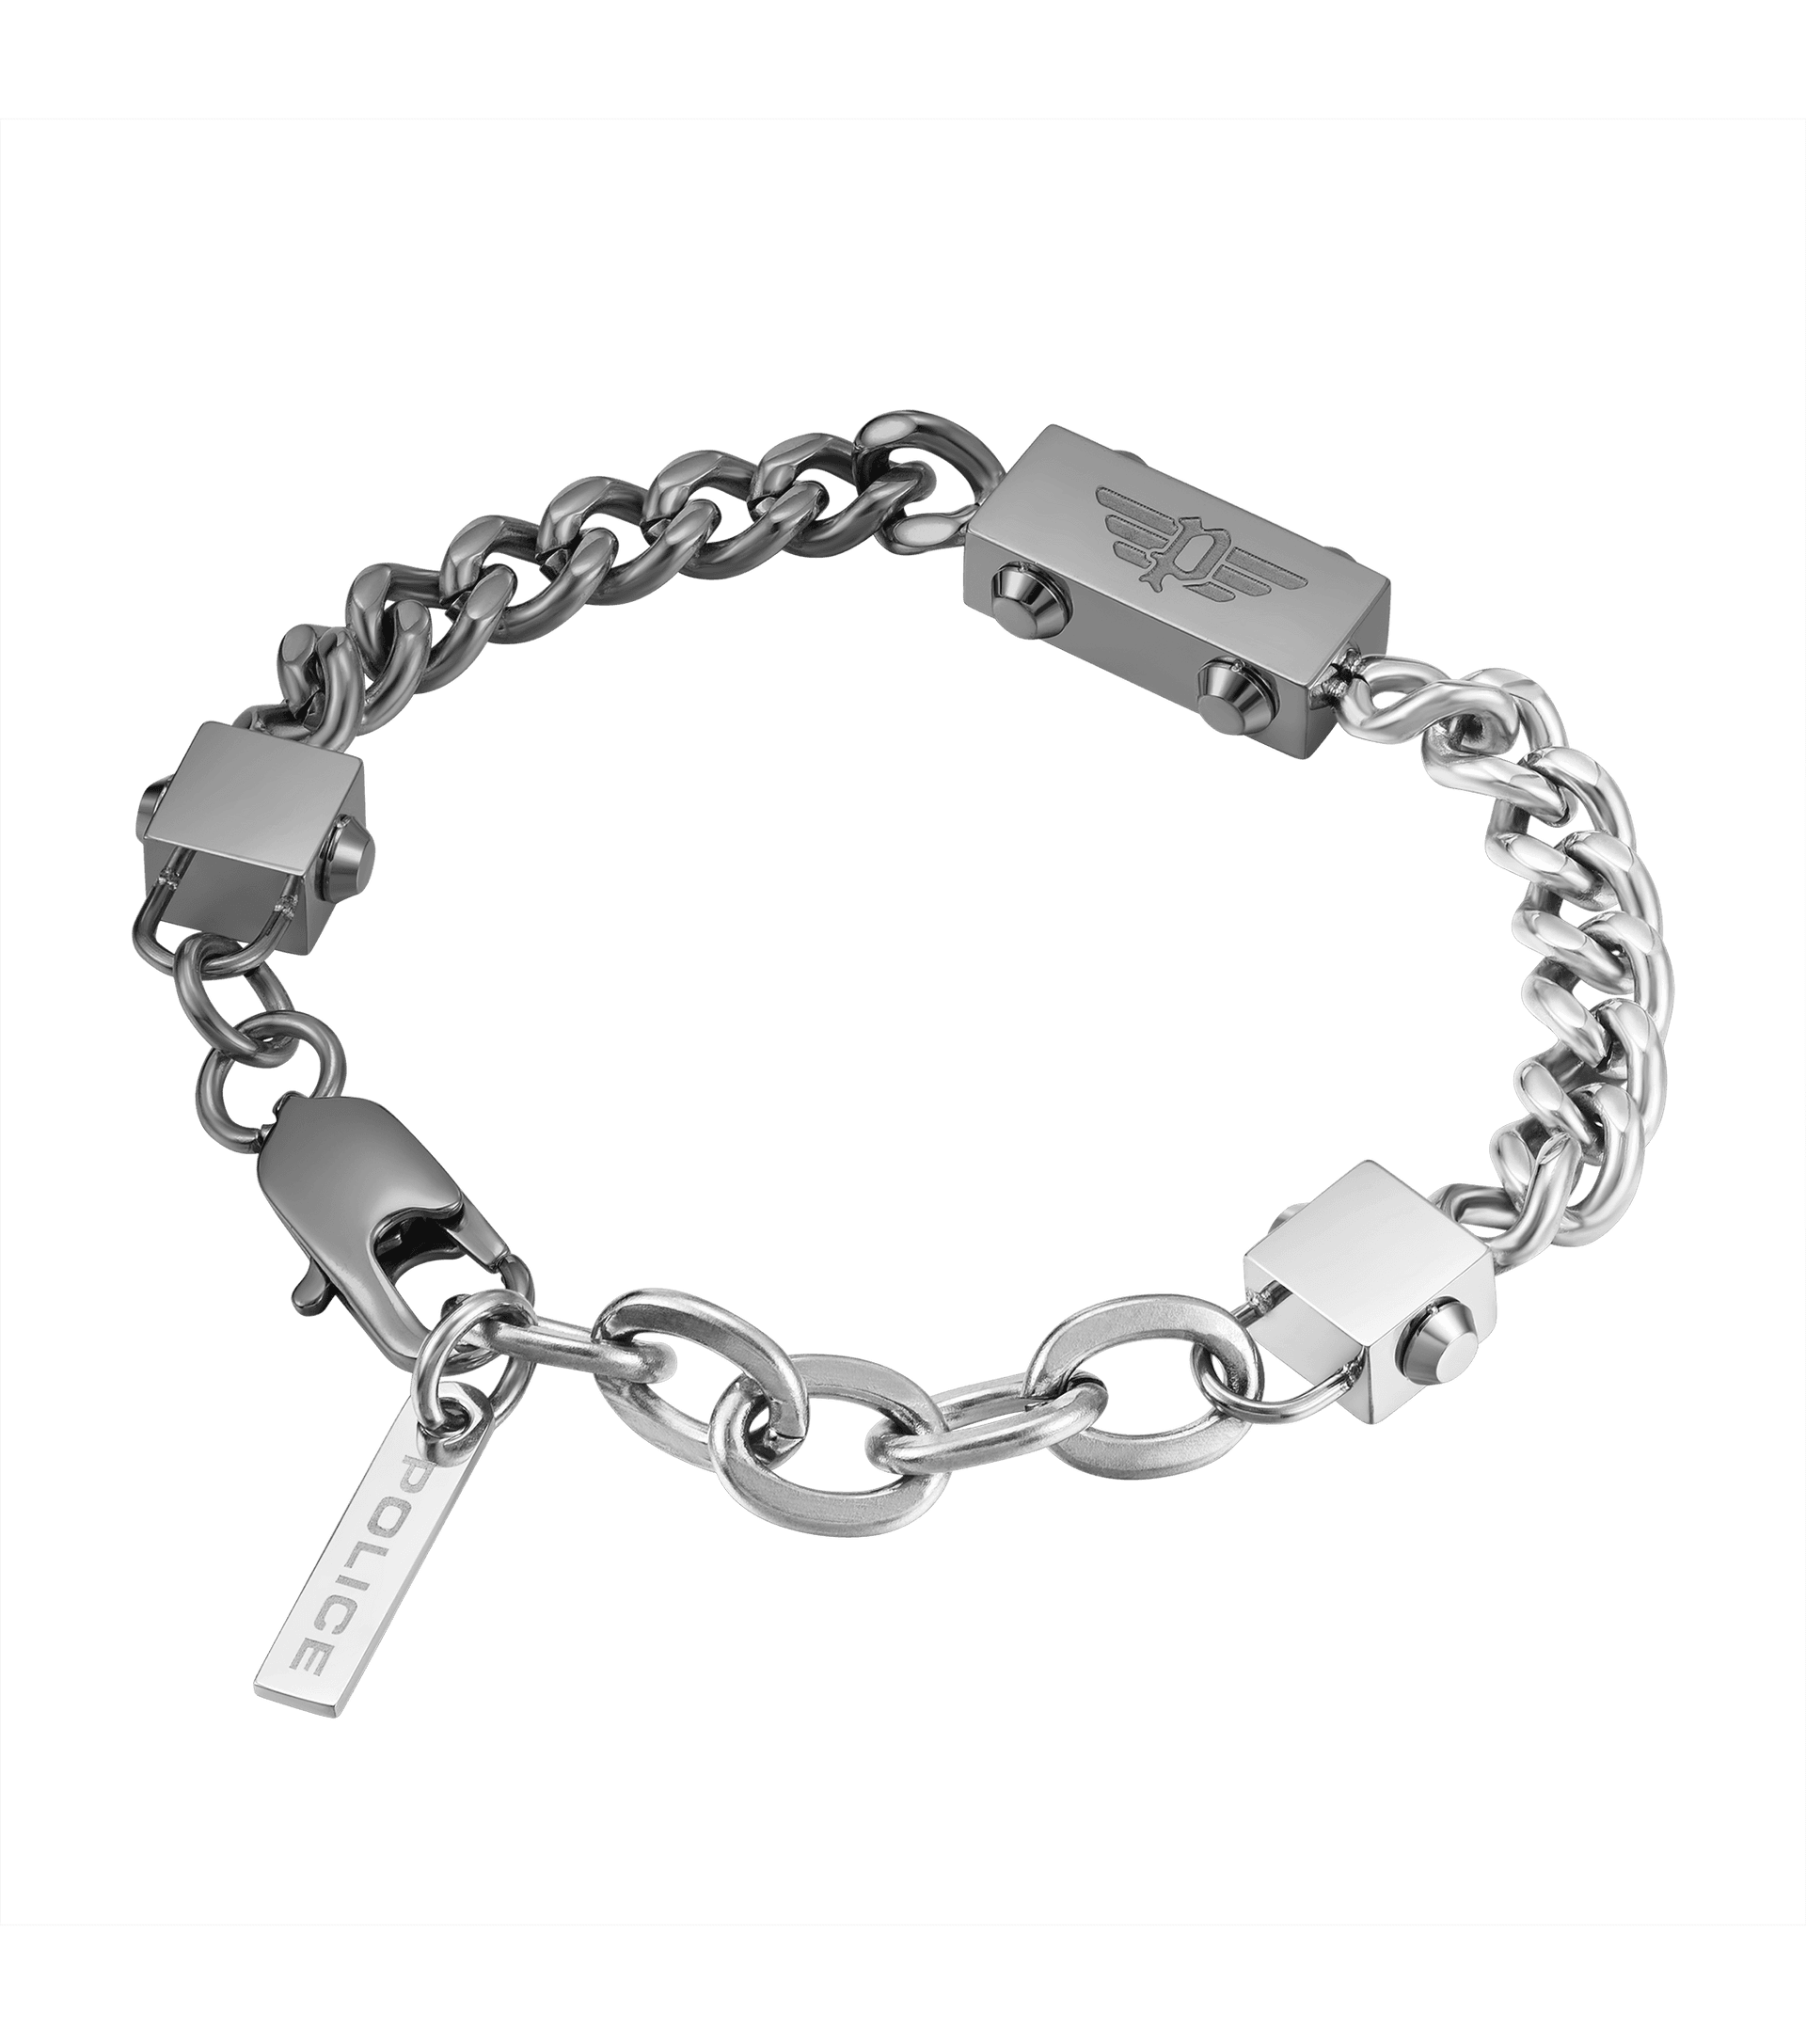 Police jewels - Chained Necklace By Police For Men PEAGN0002102